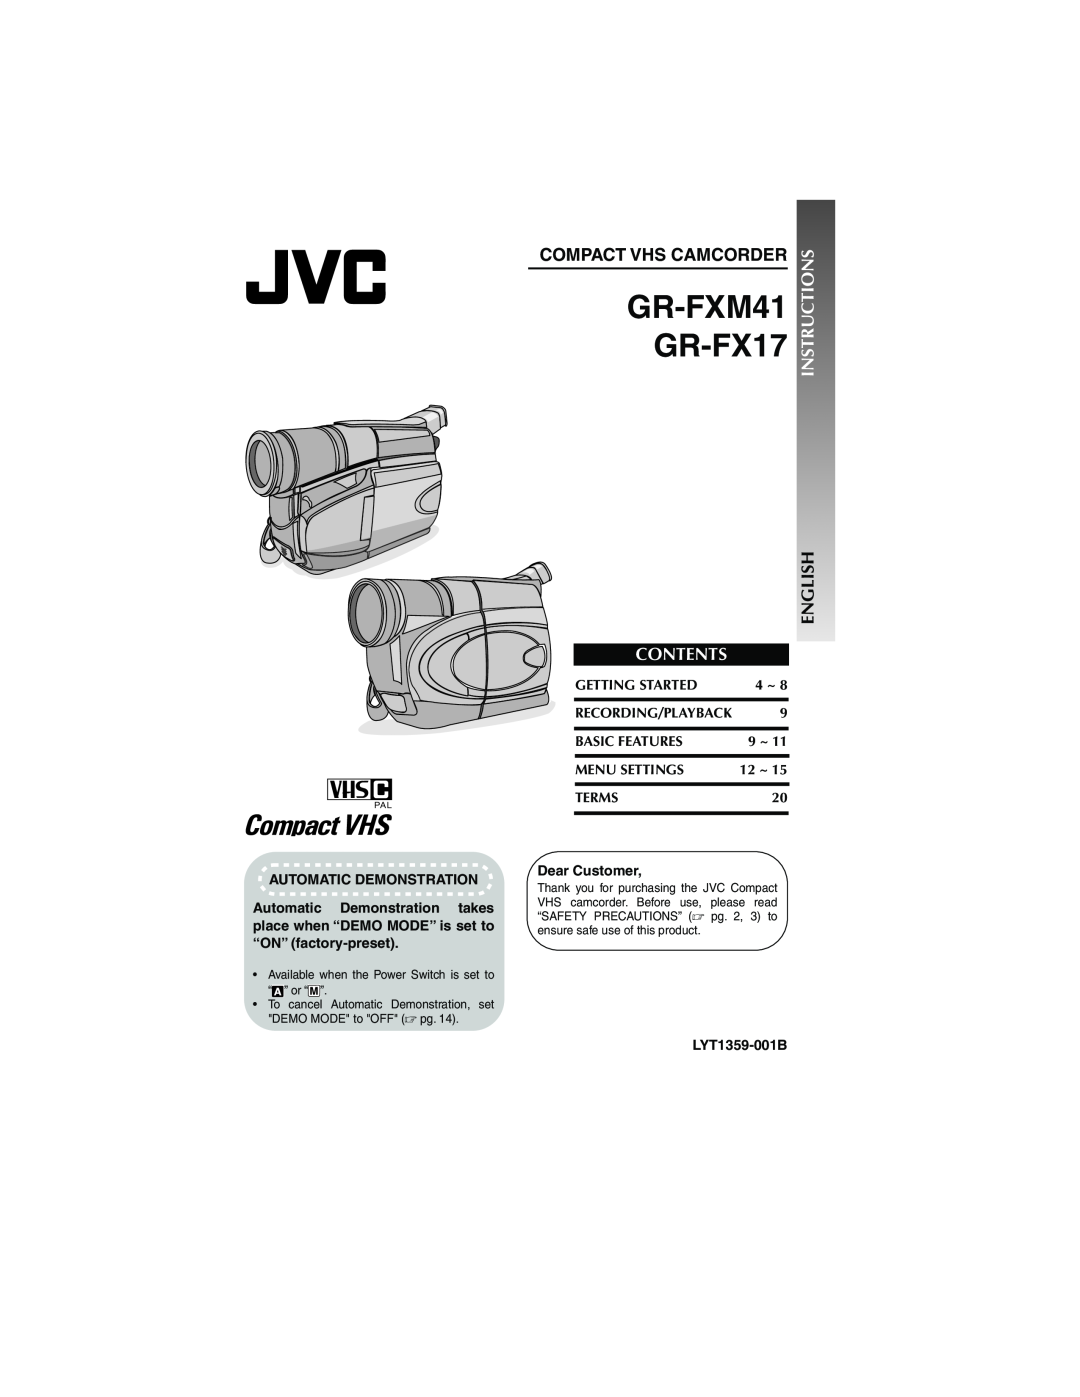 JVC GR-FX17 manual Compact Vhs Camcorder, Contents, Instructions, Automatic Demonstration, Dear Customer, LYT1359-001B 